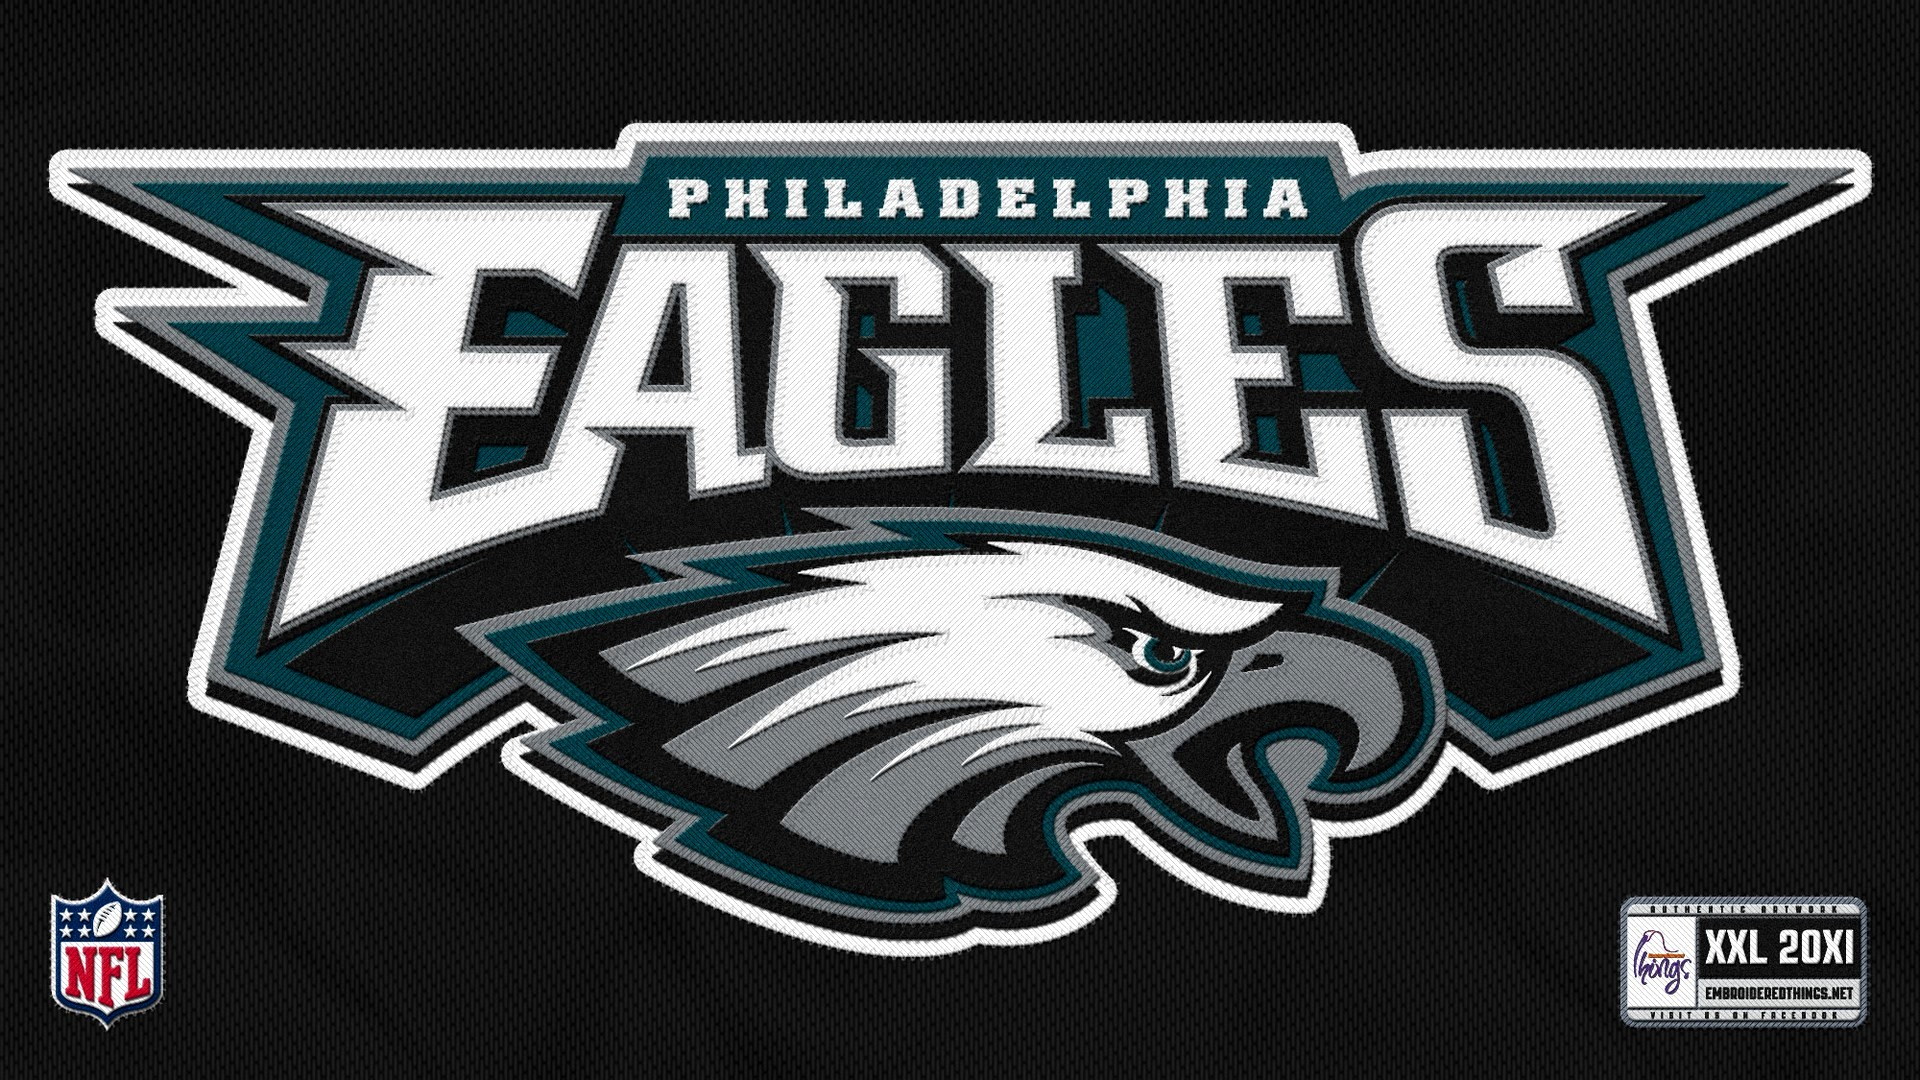 Philadelphia Eagles NFL Wallpaper For Desktop with high-resolution 1920x1080 pixel. You can use and set as wallpaper for Notebook Screensavers, Mac Wallpapers, Mobile Home Screen, iPhone or Android Phones Lock Screen